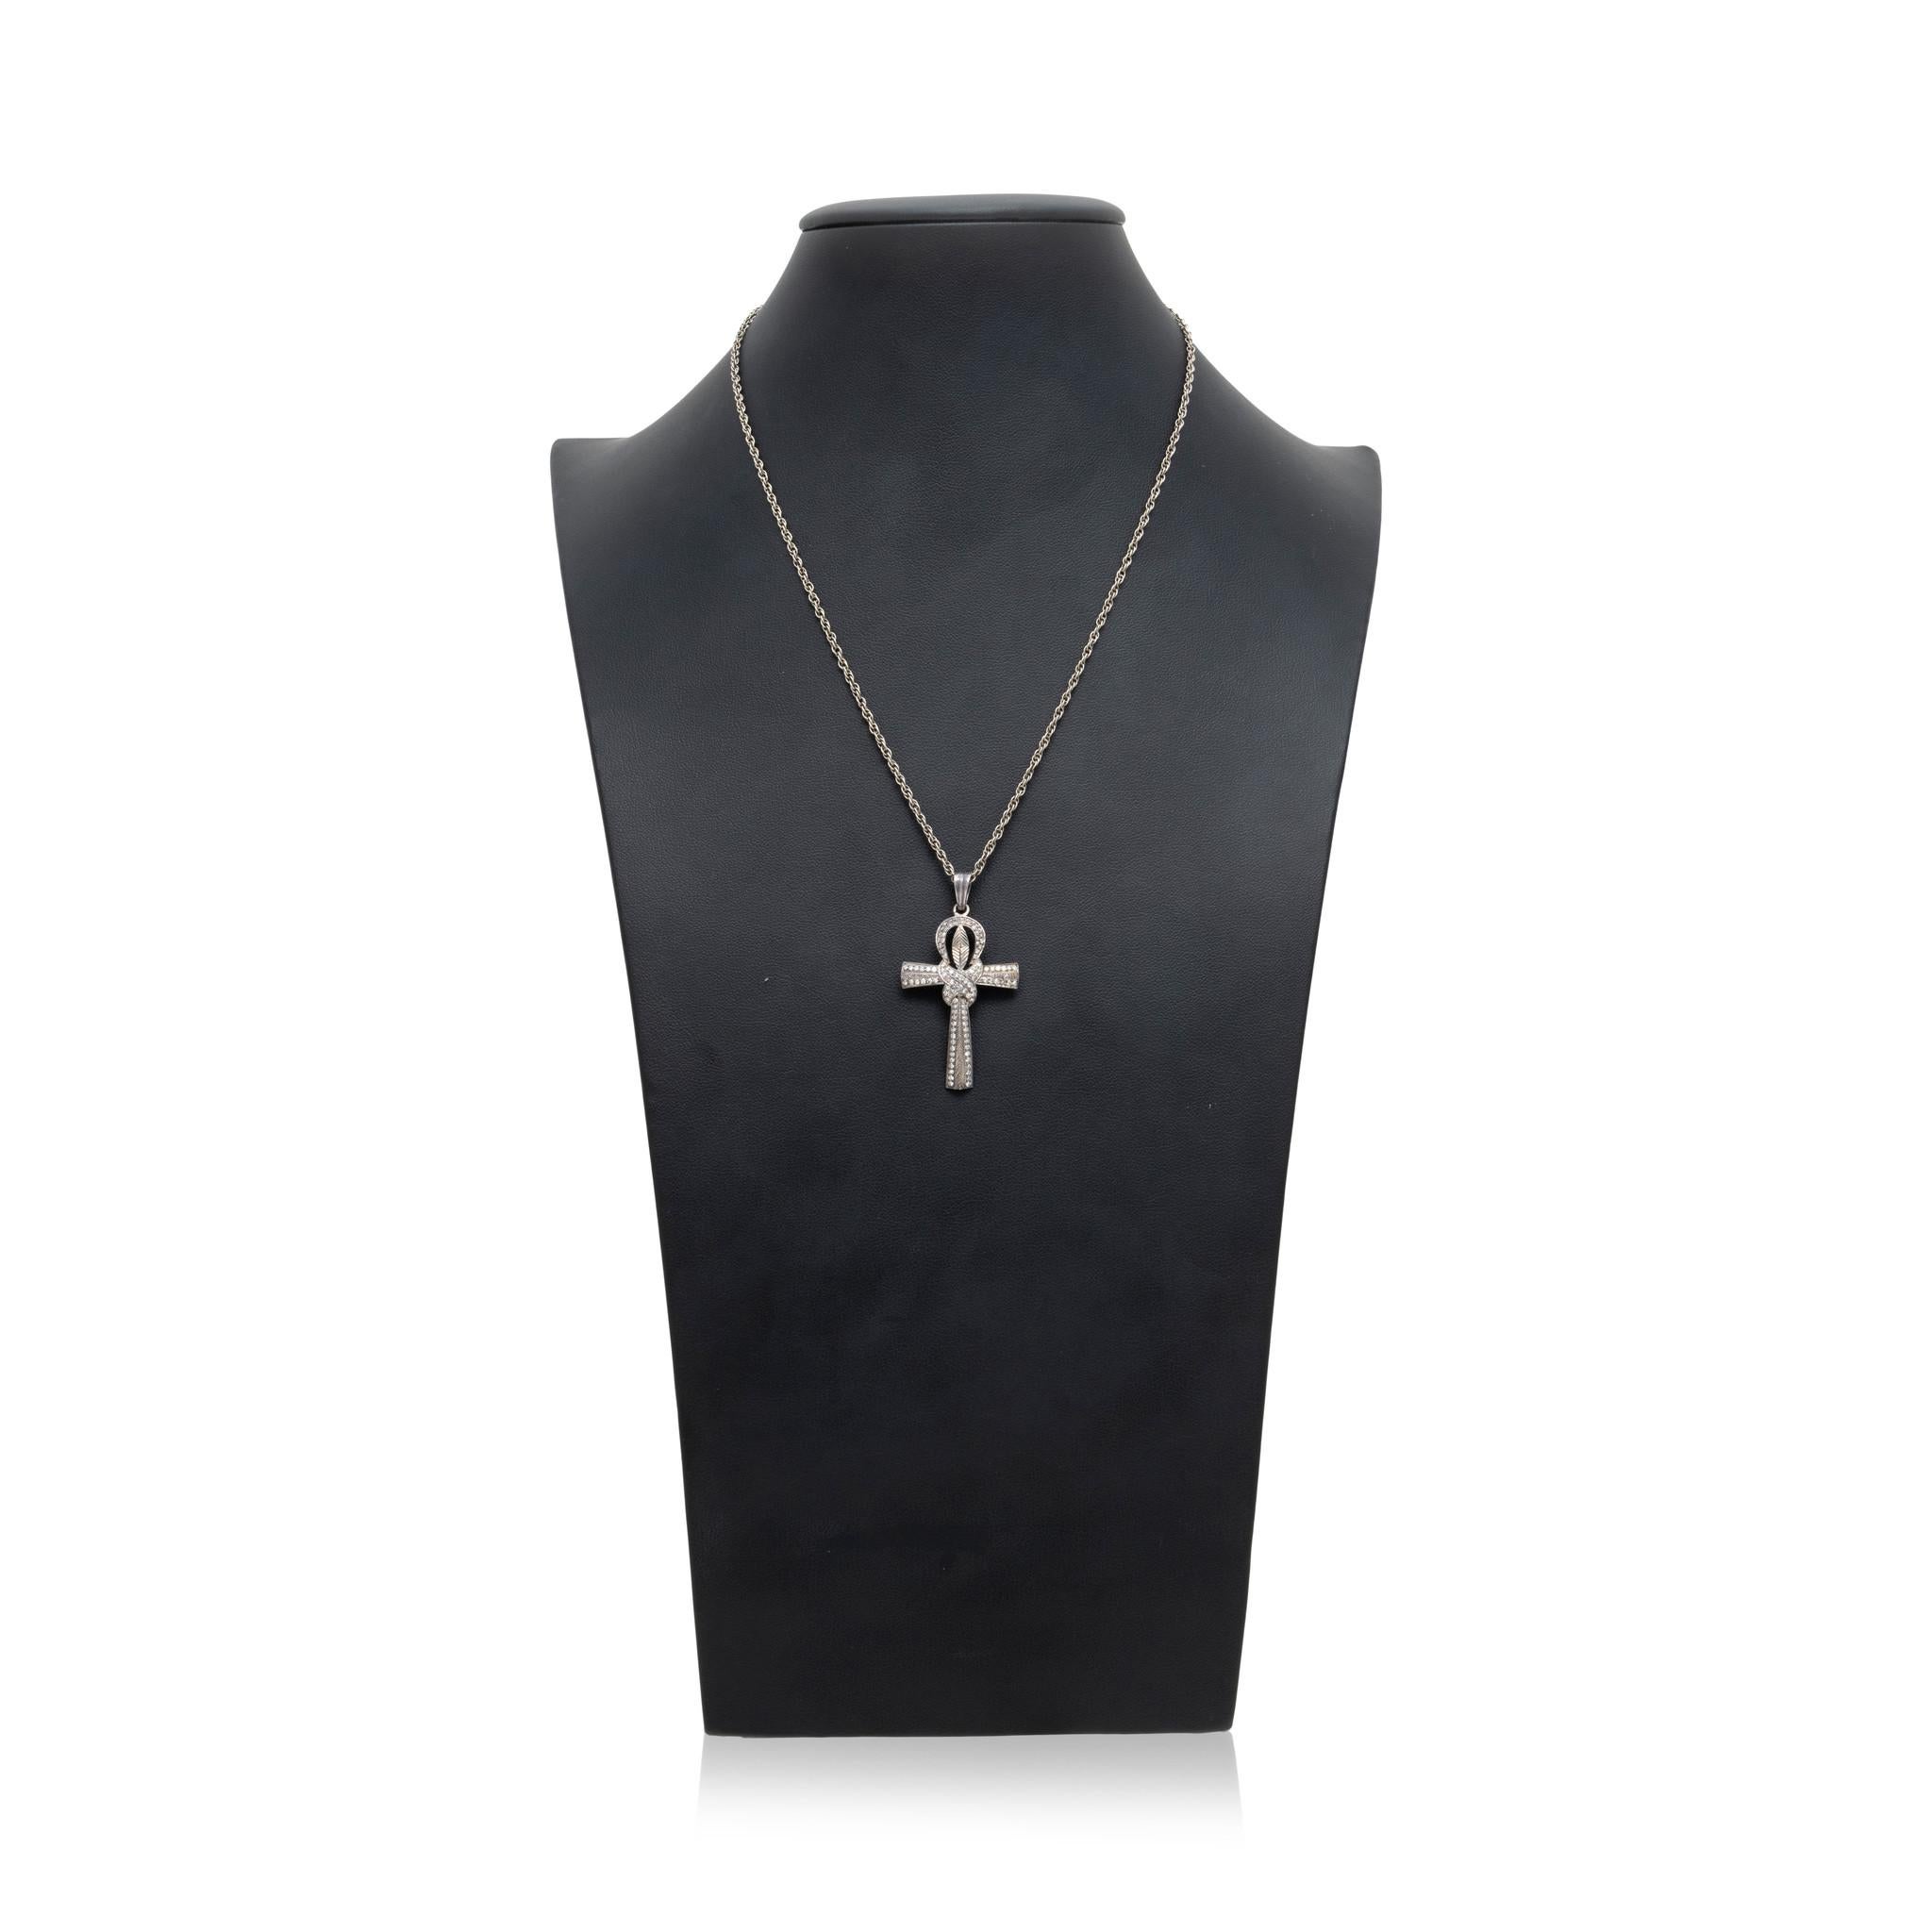 Diamond and silver cross pendant. Featuring knotted anubis style design with a total of 82 small round cut diamonds along surface weighing approximately 79cttw. Center of knot has an etched leaf design. With larger loop to accommodate more chain